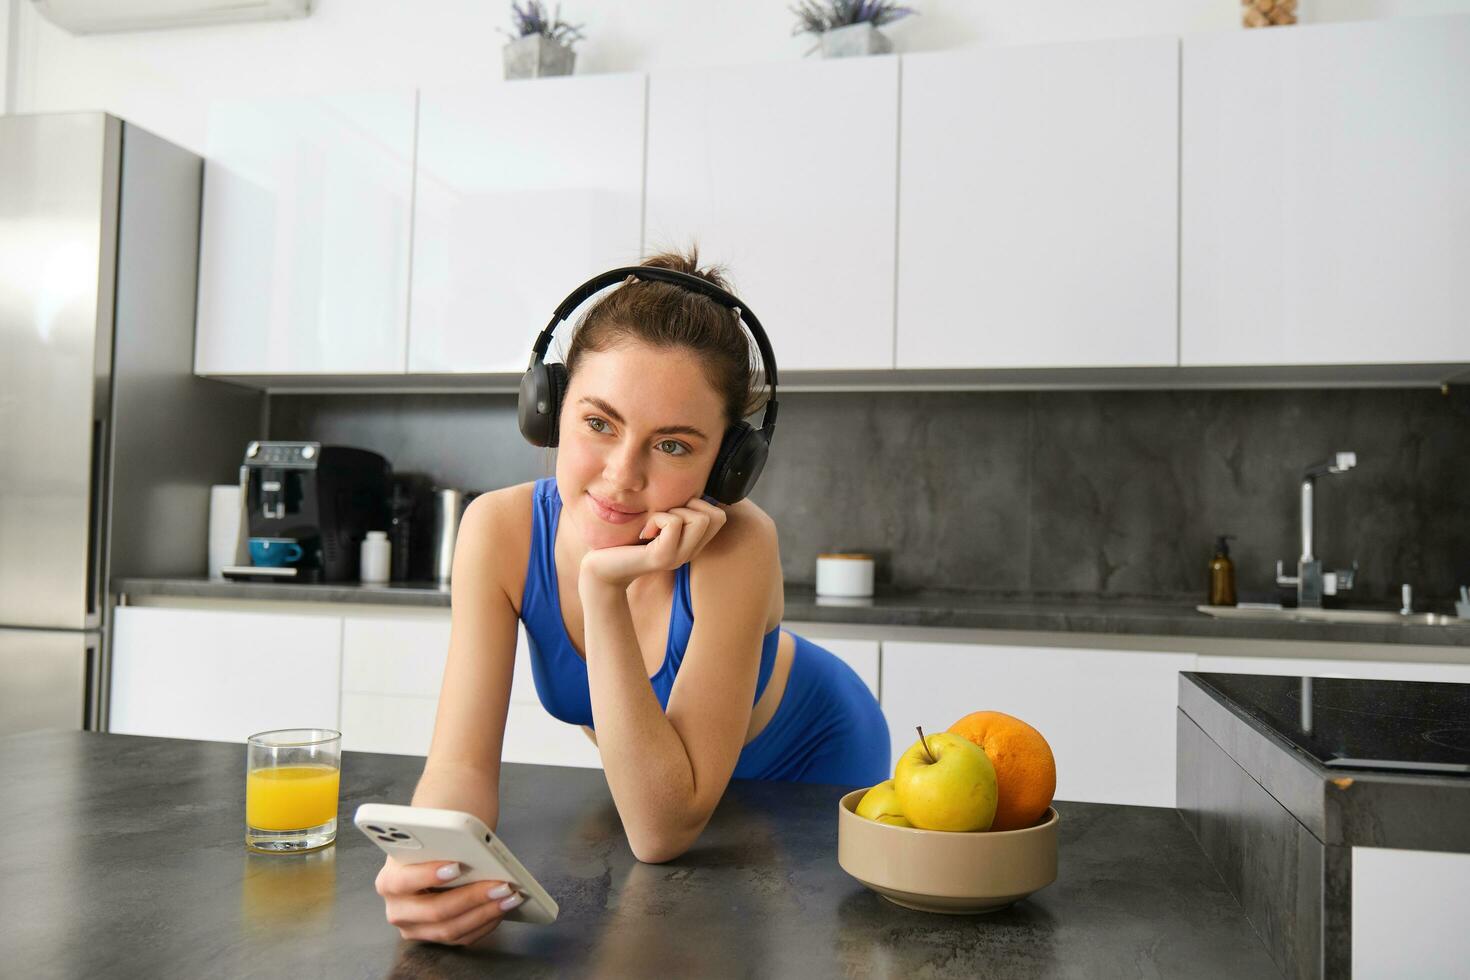 Portrait of young fitness woman with headphones, drinking orange juice in kitchen and using smartphone, listening music, getting ready for workout gym photo